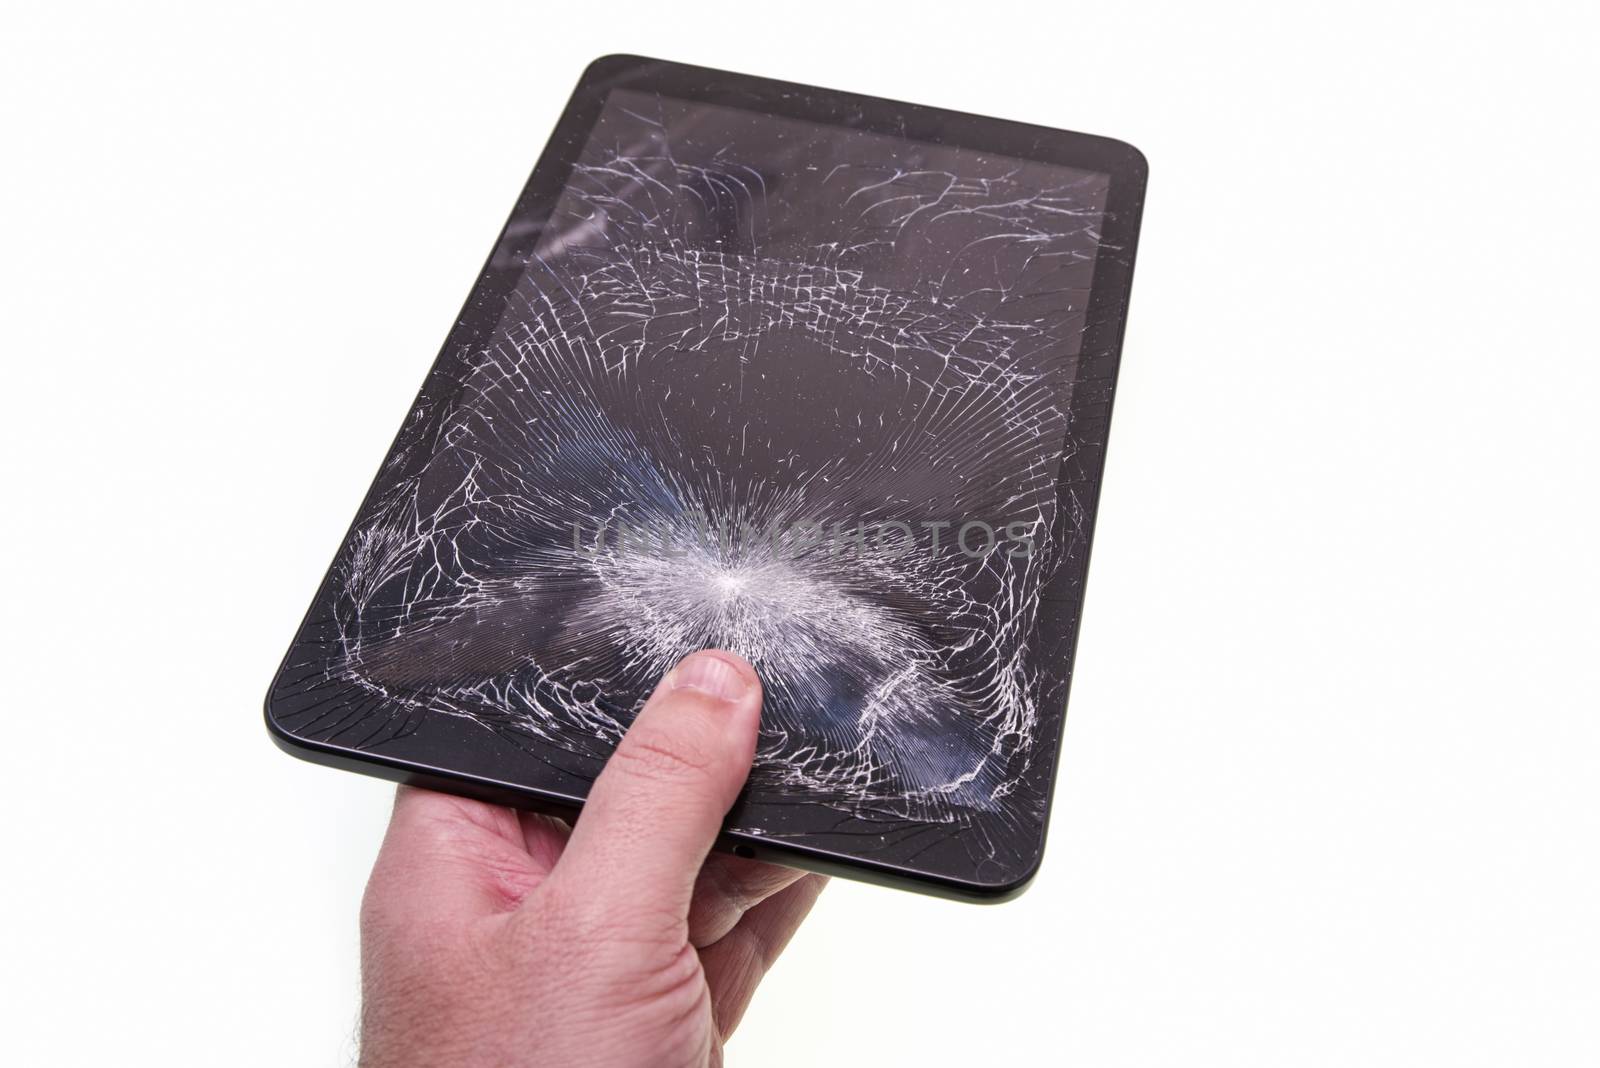 Hand holding a cracked tablet over white bacground